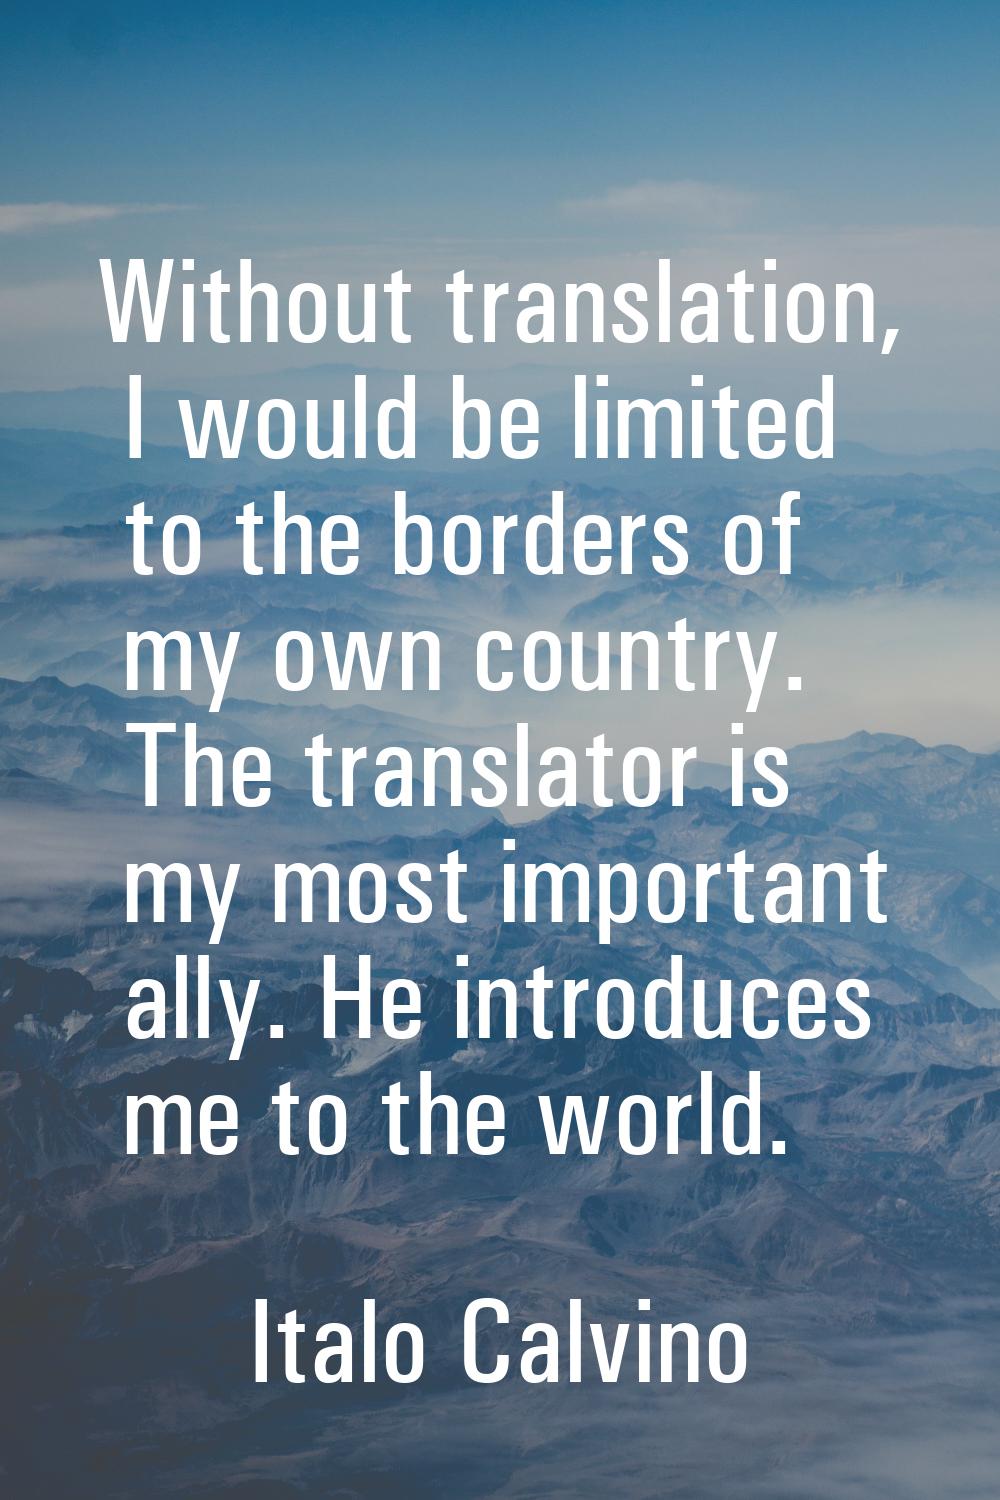 Without translation, I would be limited to the borders of my own country. The translator is my most